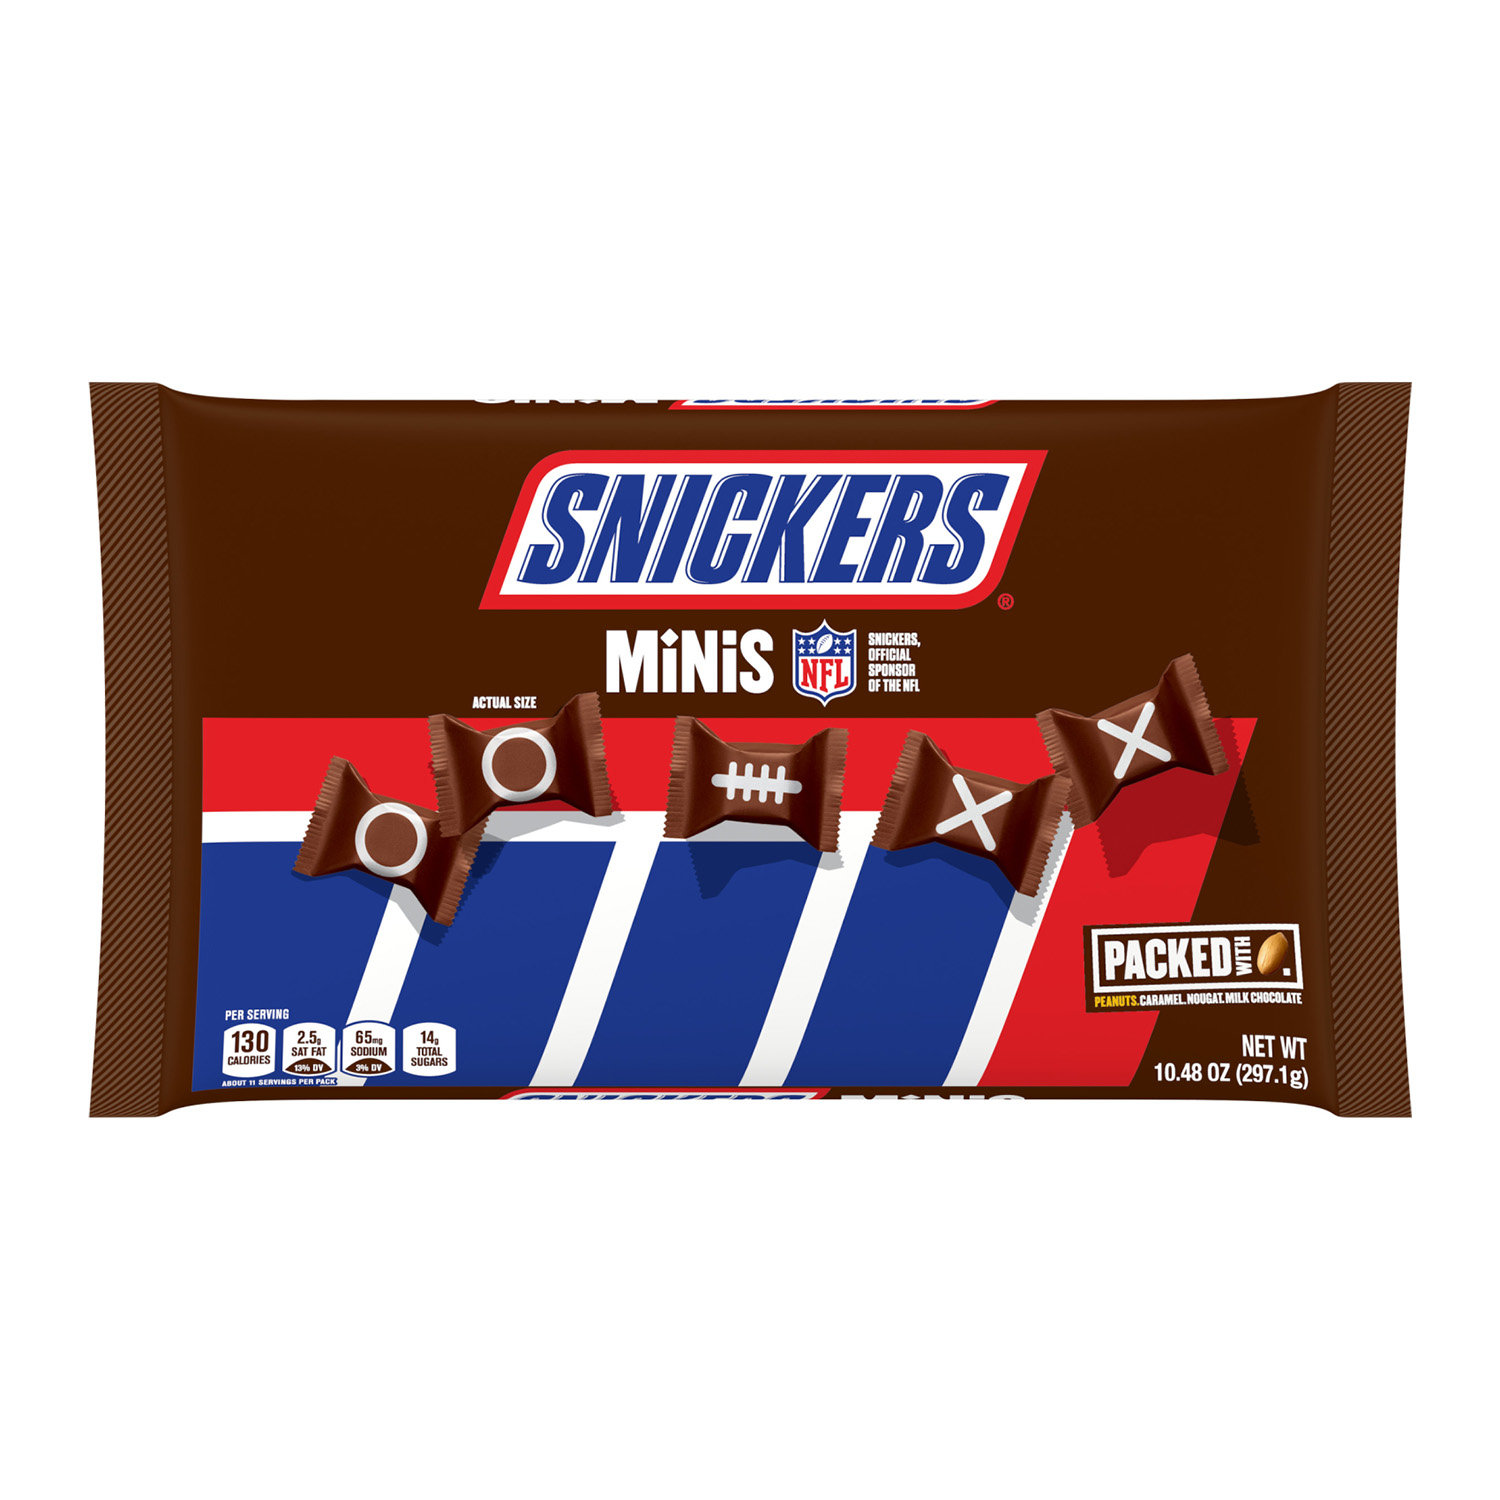 Snickers Minis Chocolate, 10.48 oz - Foods Co.